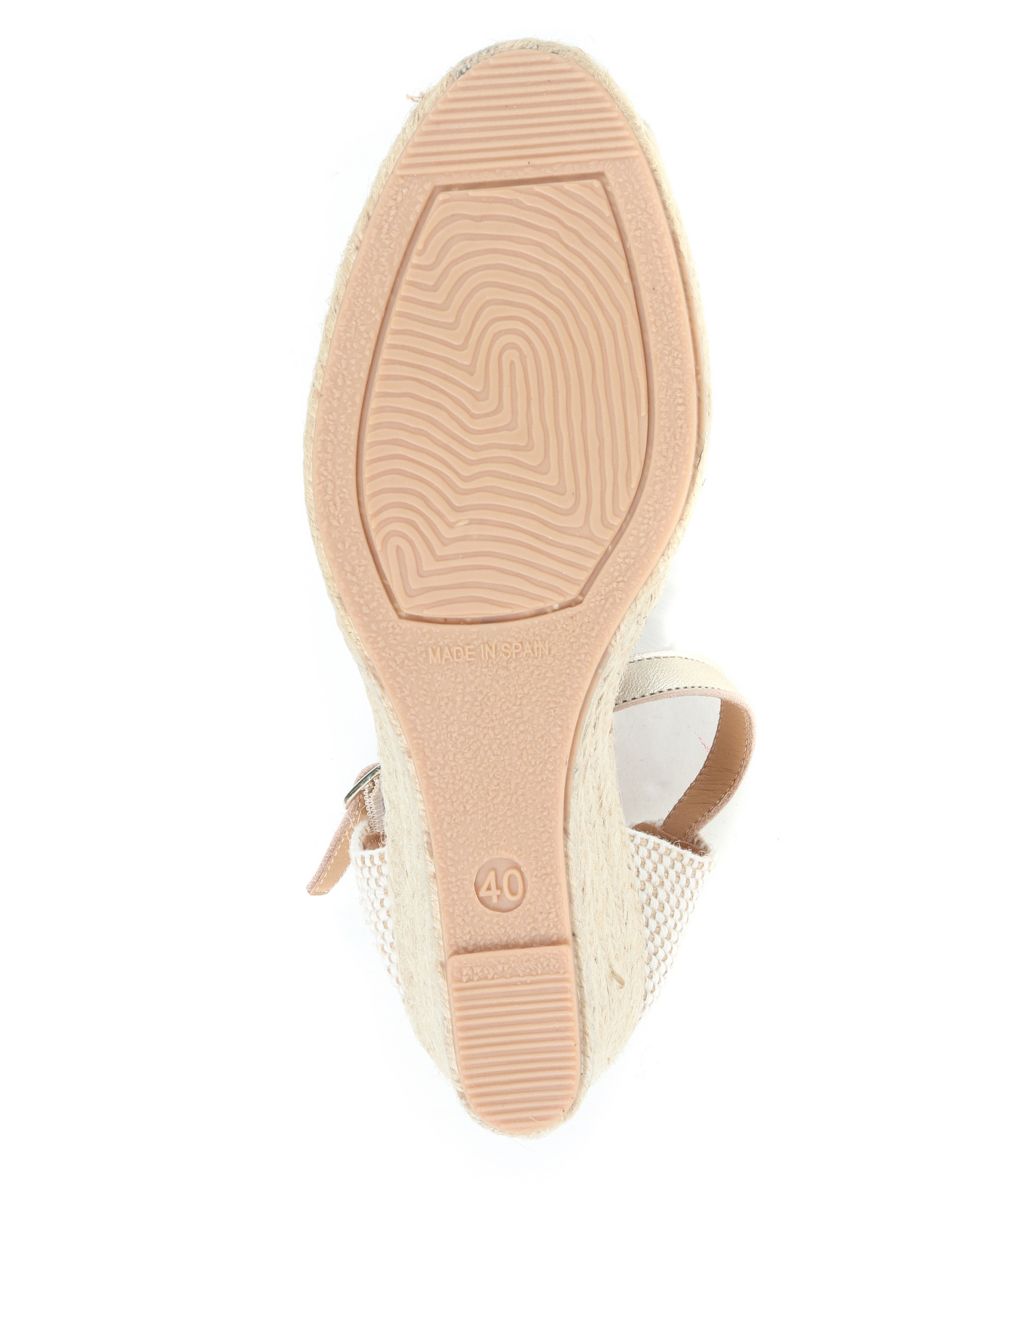 Leather Ankle Strap Wedge Espadrilles image 3